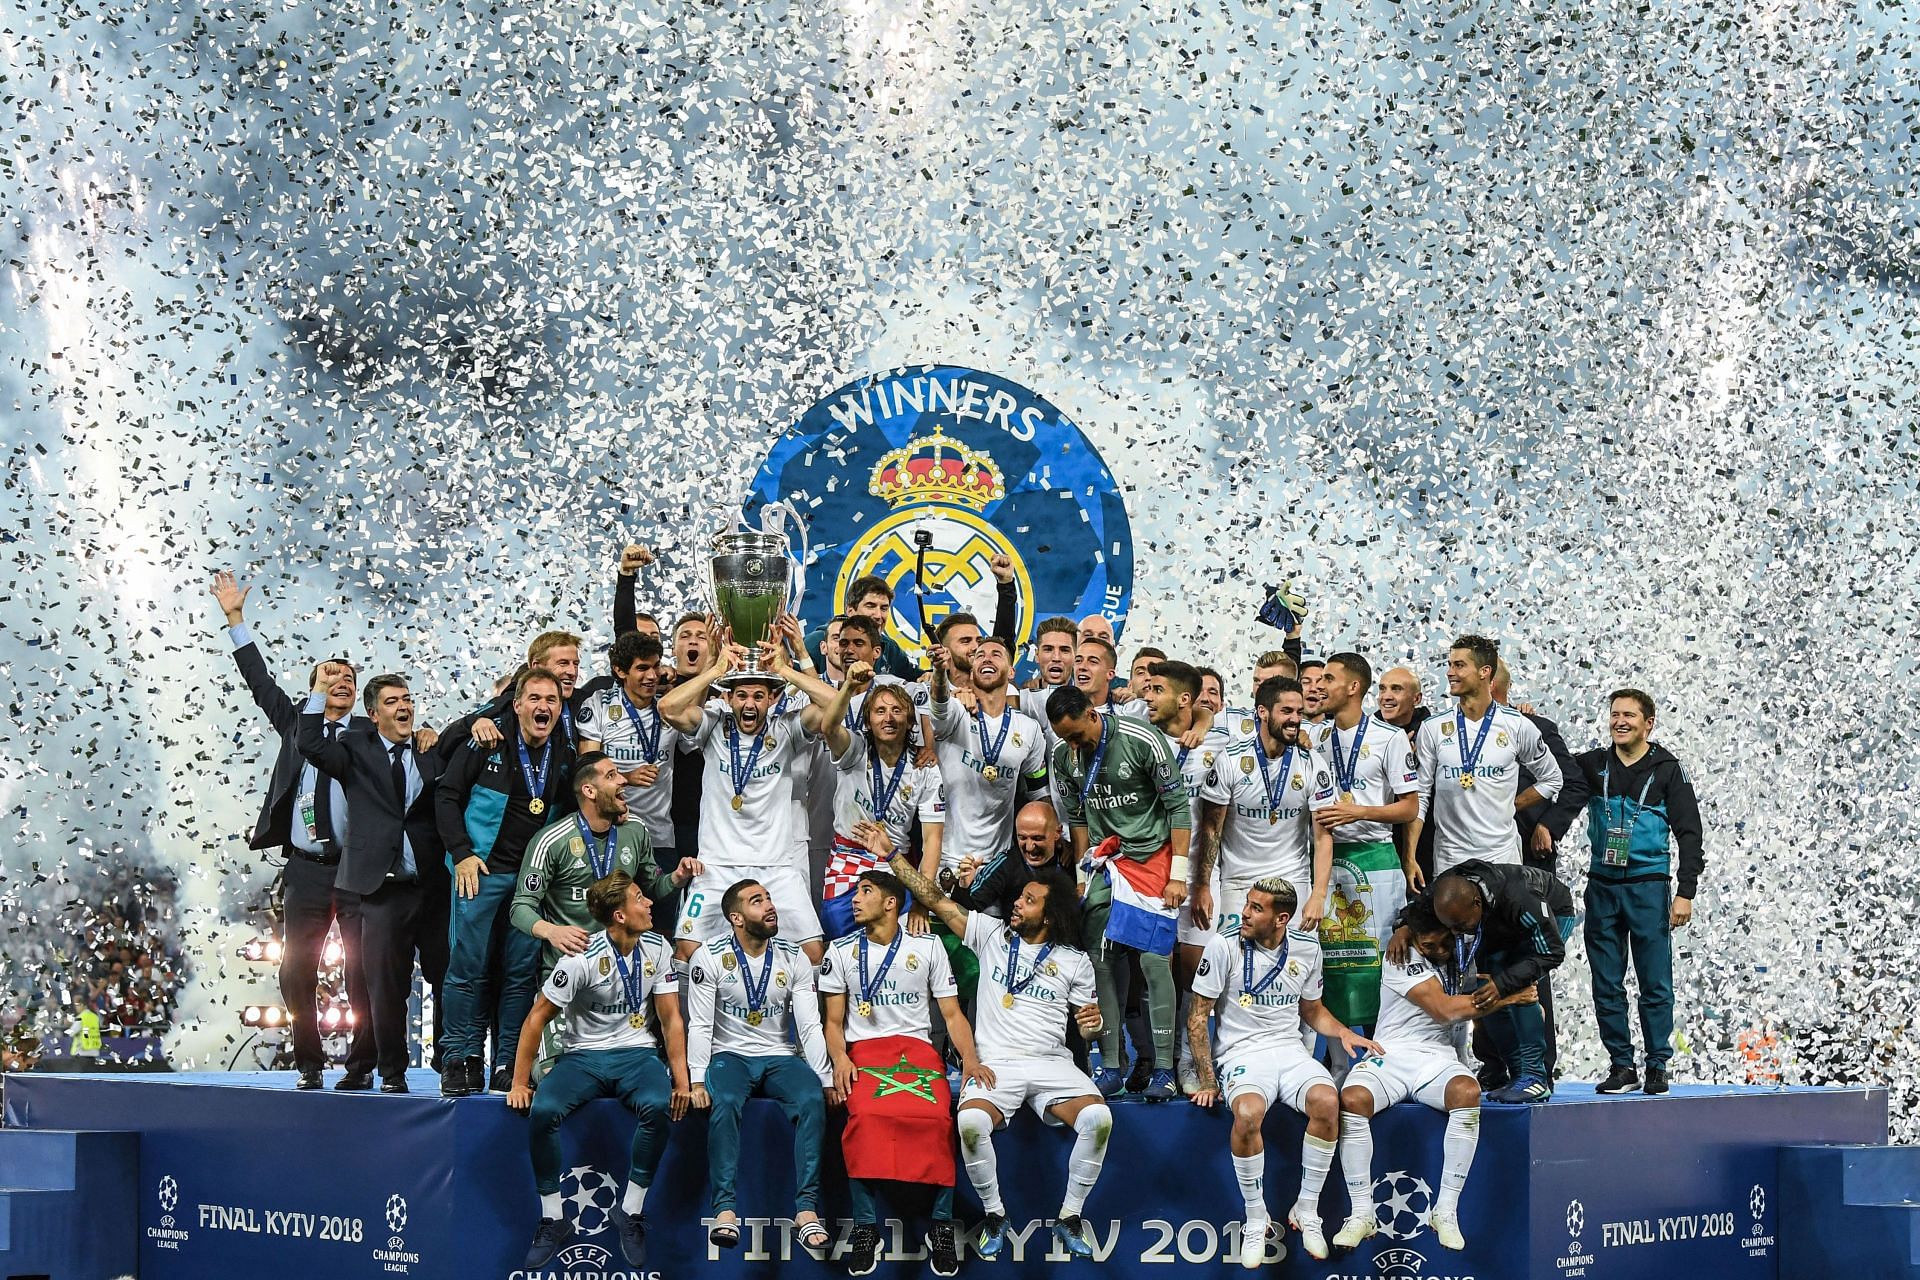 Real Madrid celebrating their 13th Champions League title